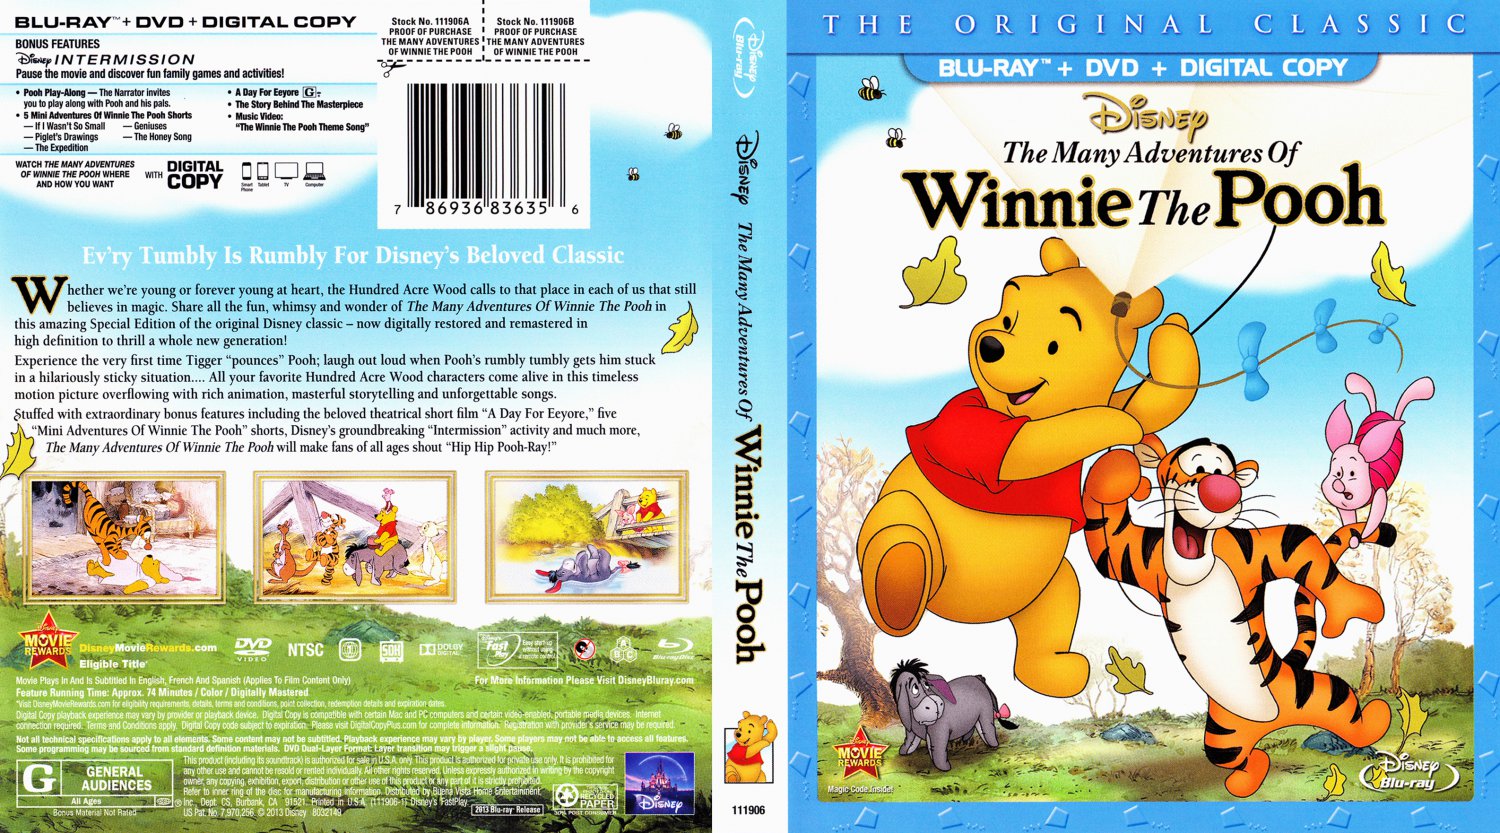 The Many Adventures Of Winnie The Pooh.